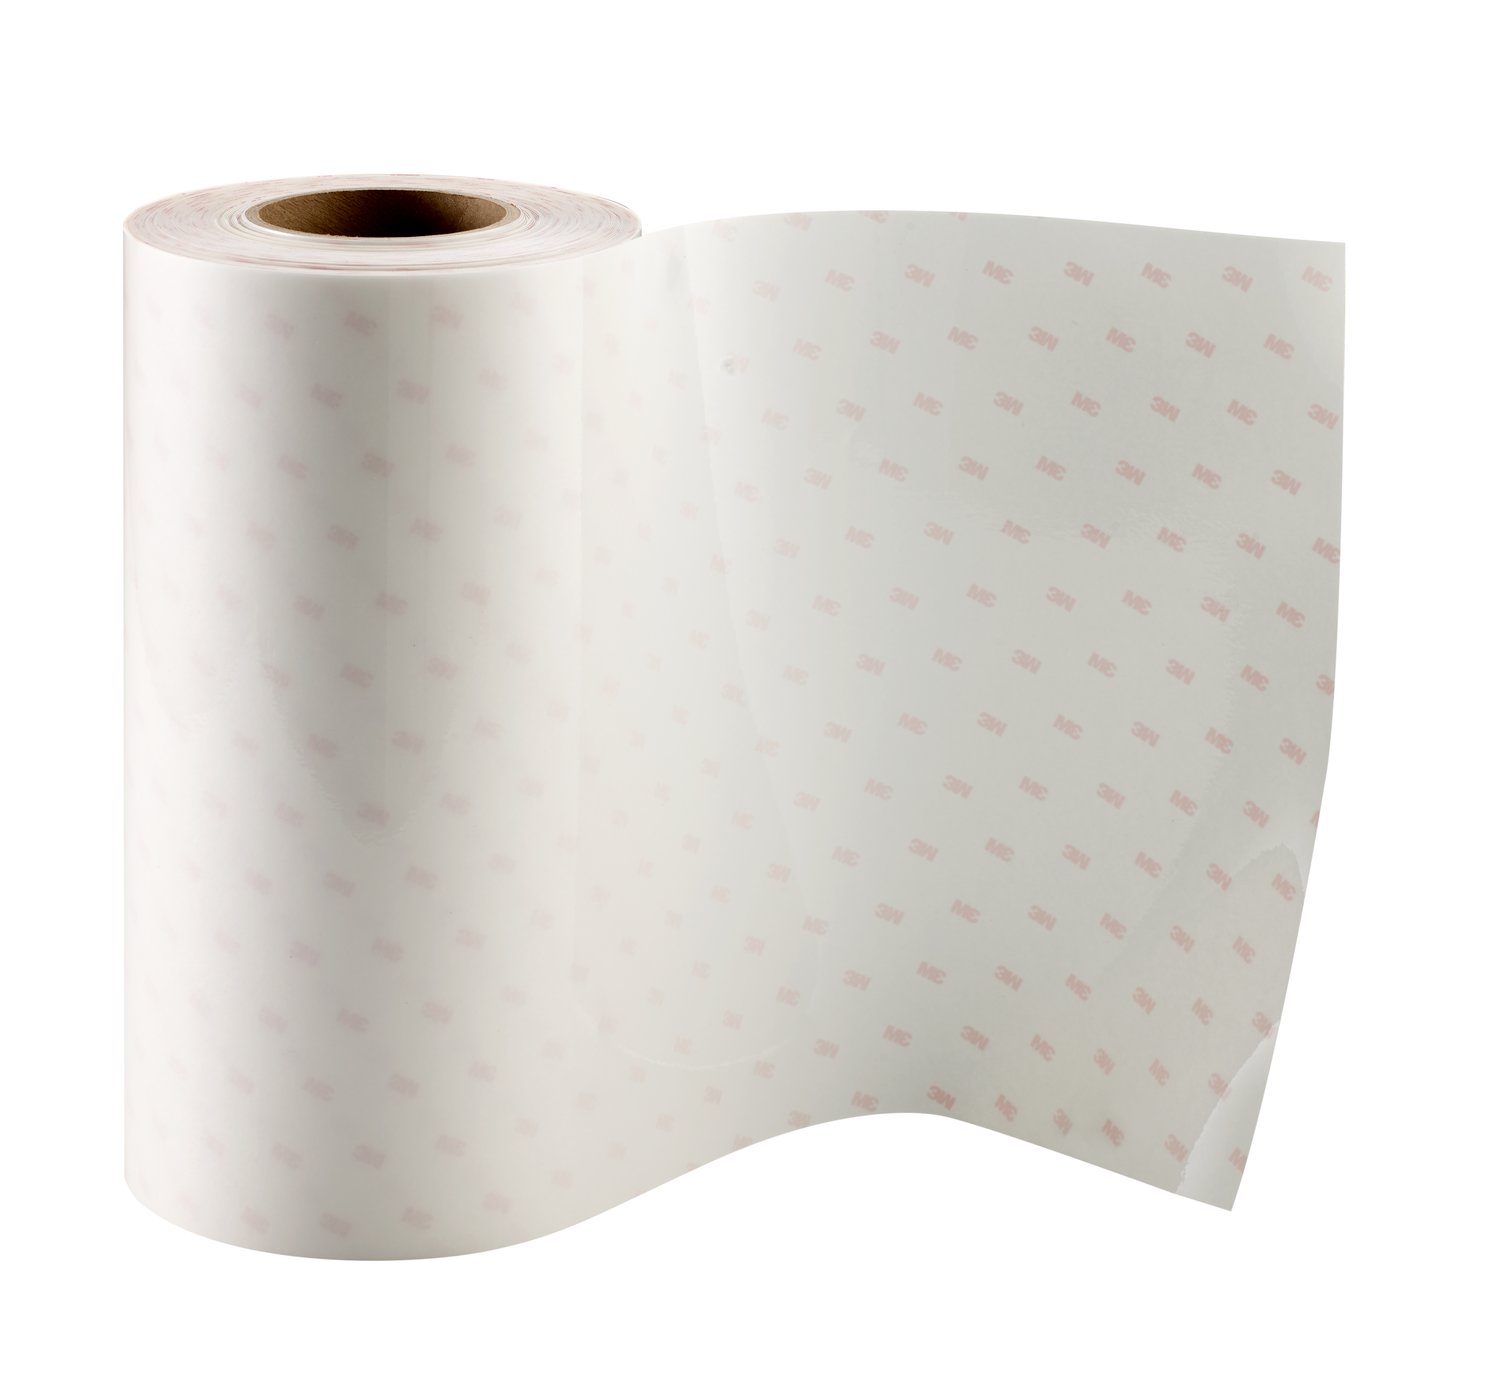 7100089301 - 3M Industrial Protective Film 7070UV, 12 in x 36 yds, 8 mil, 1 roll per
case